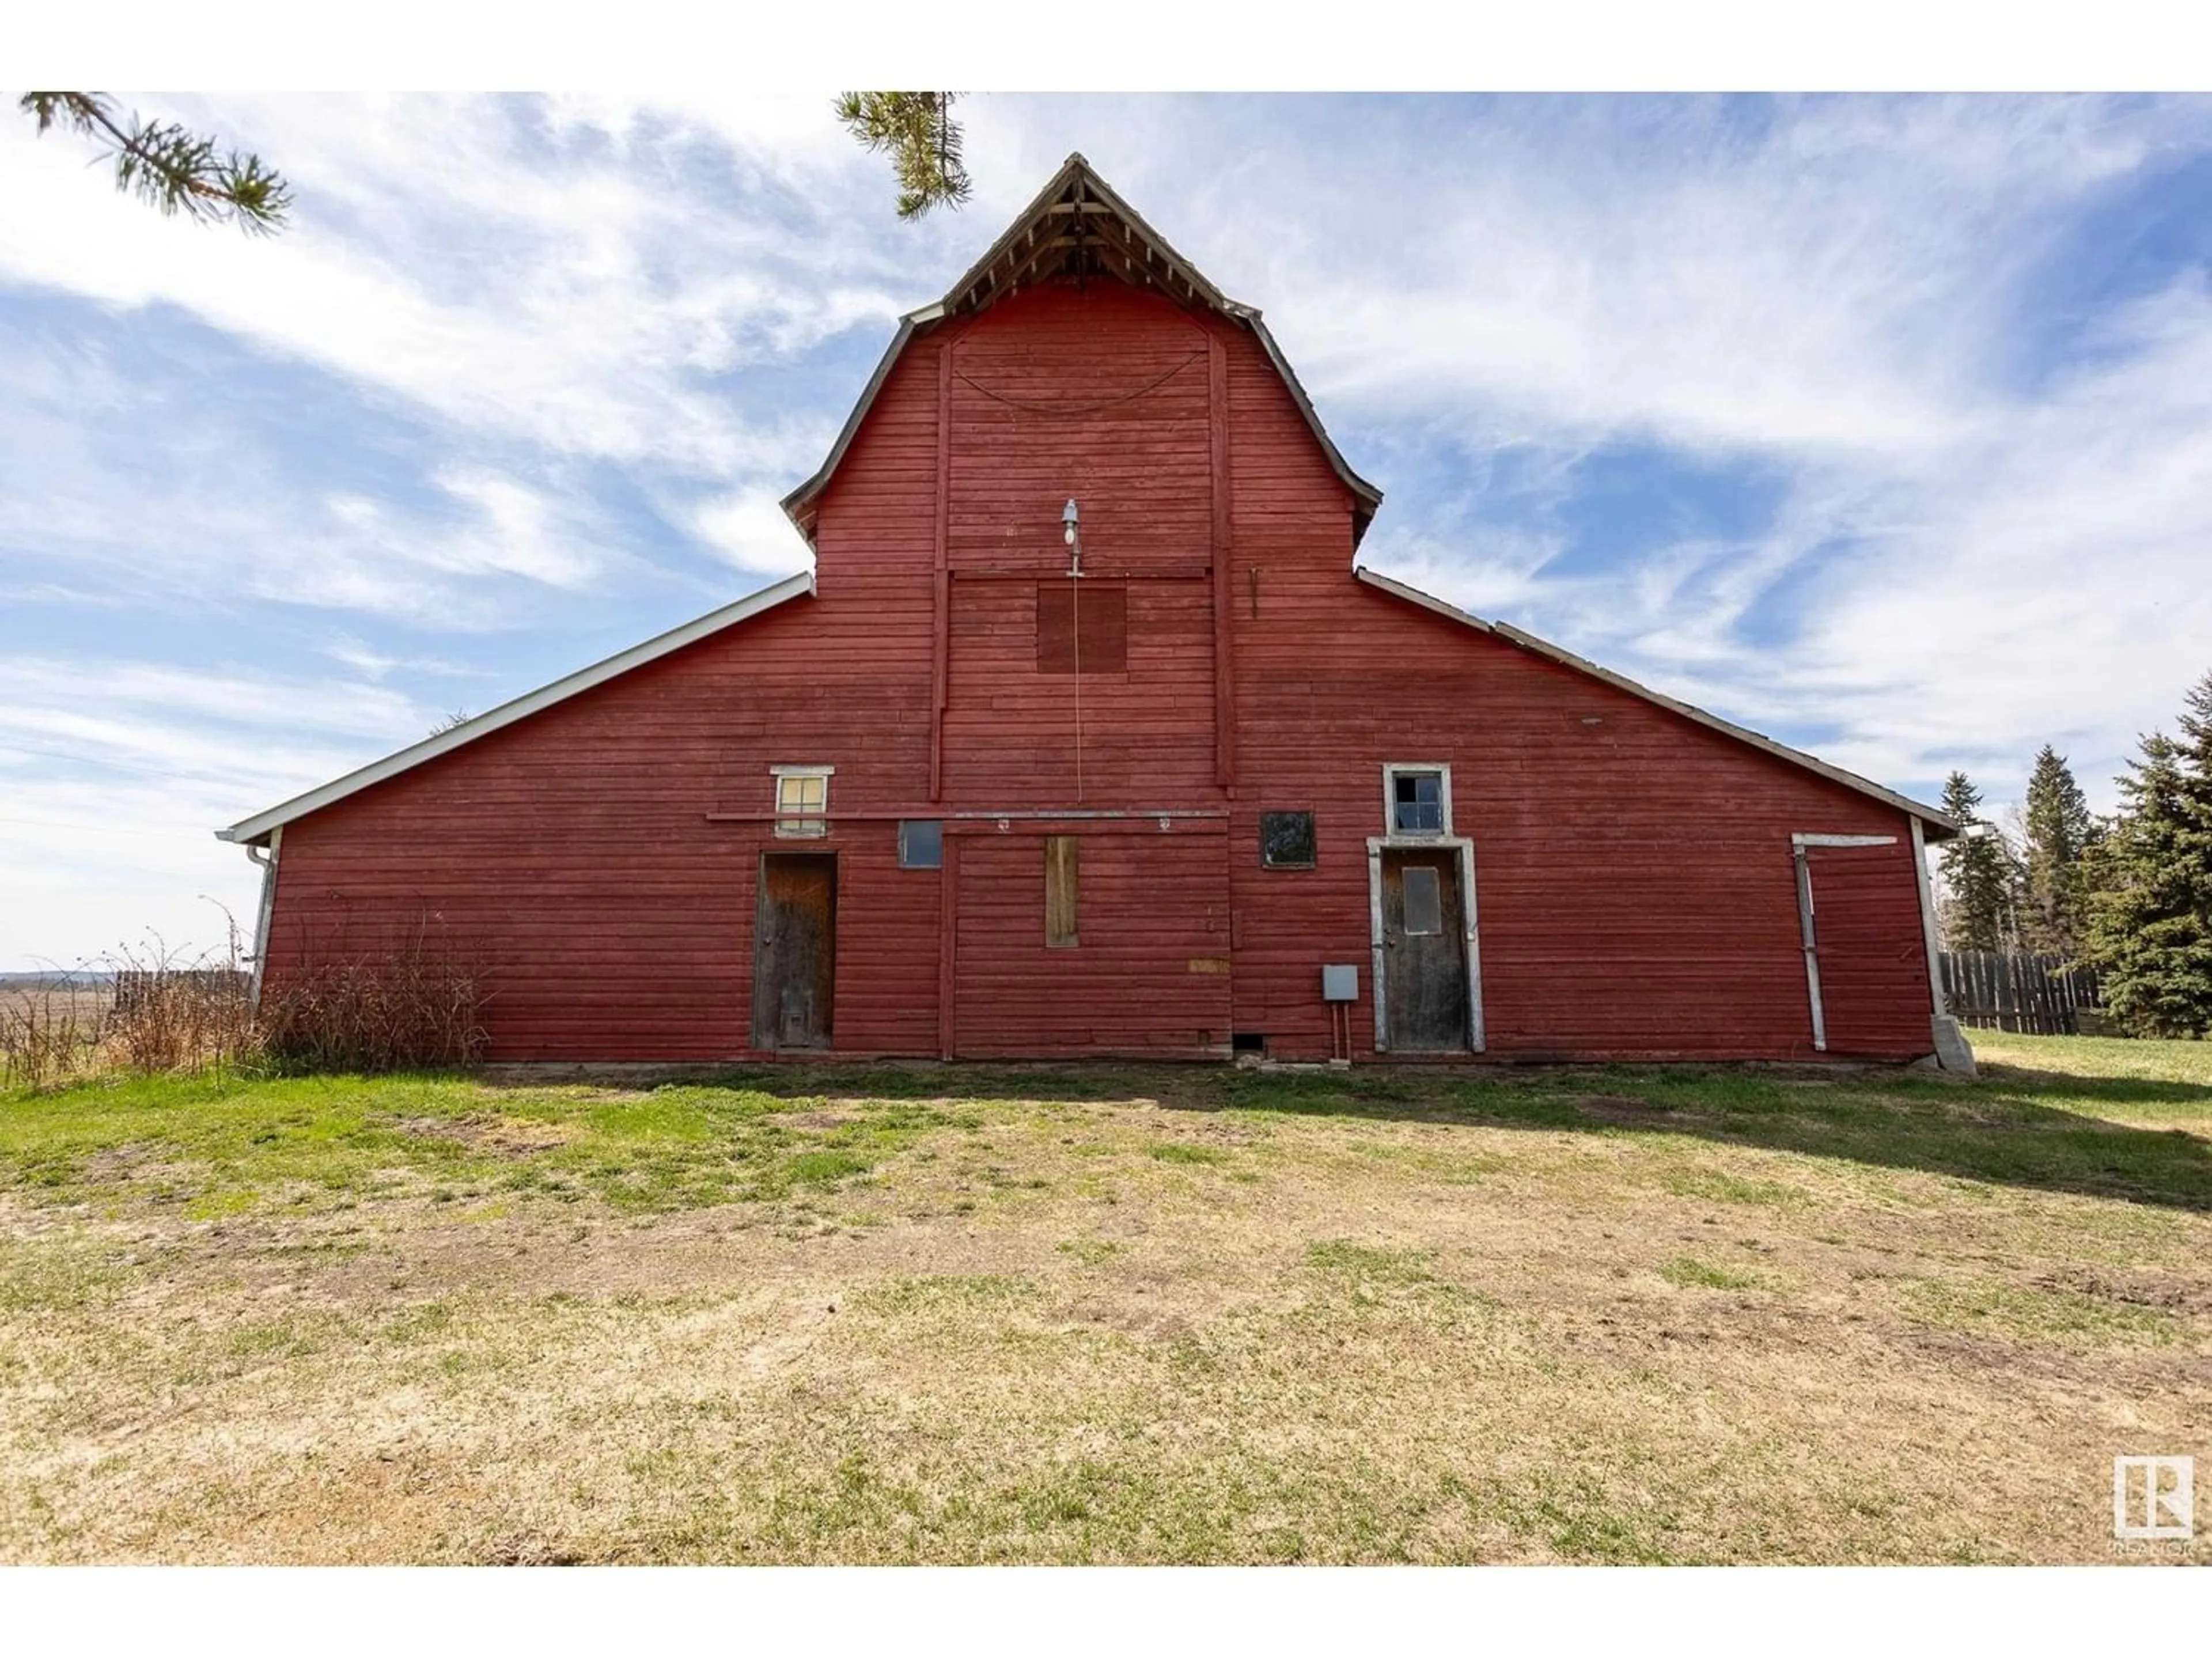 Shed for 453014 RGE RD 274, Rural Wetaskiwin County Alberta T0H1H0